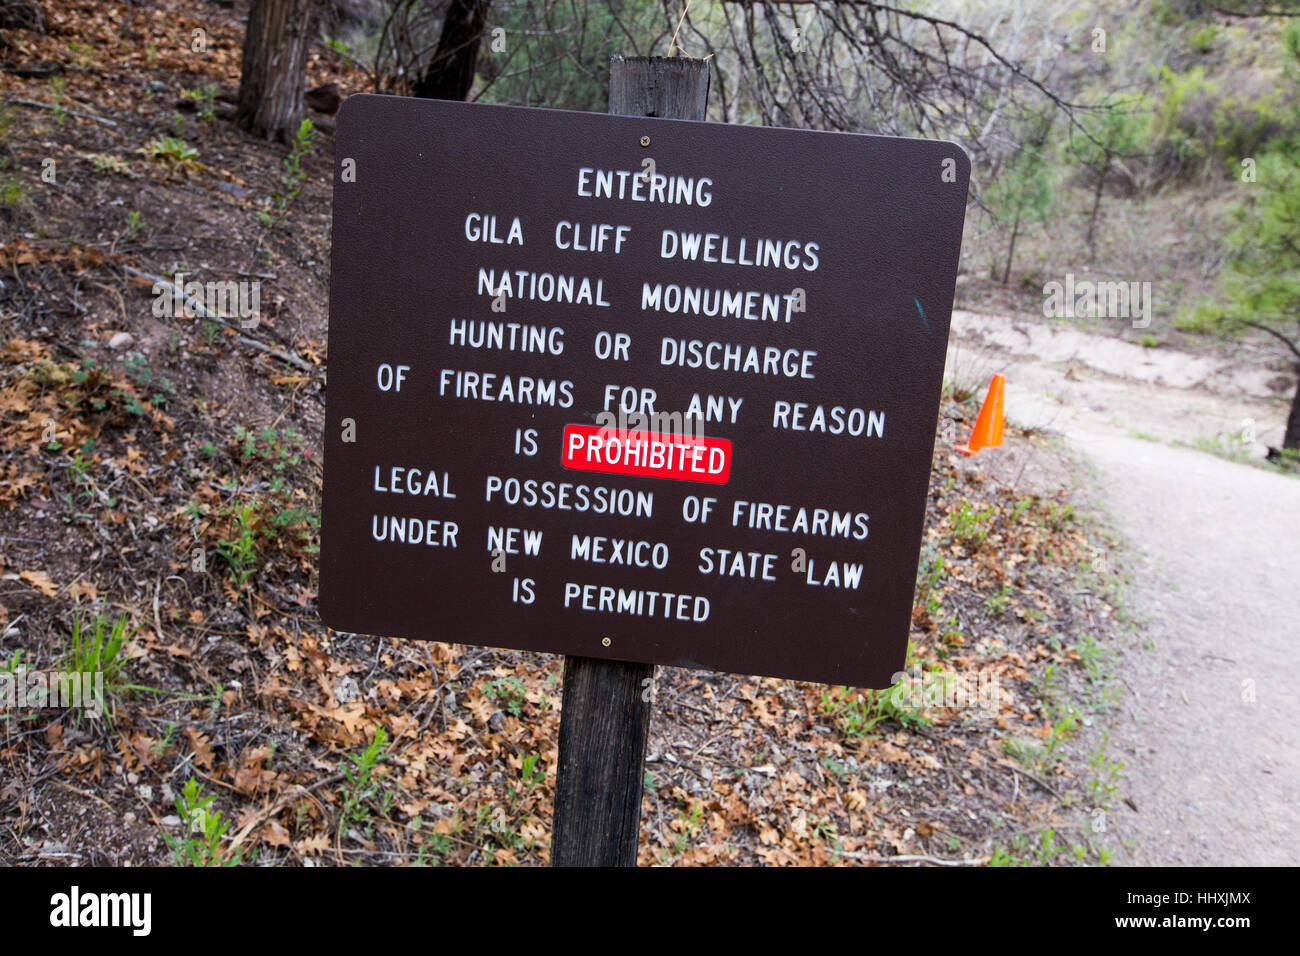 Firearms legal in Gila Cliff Dwellings National Monument sign Stock Photo